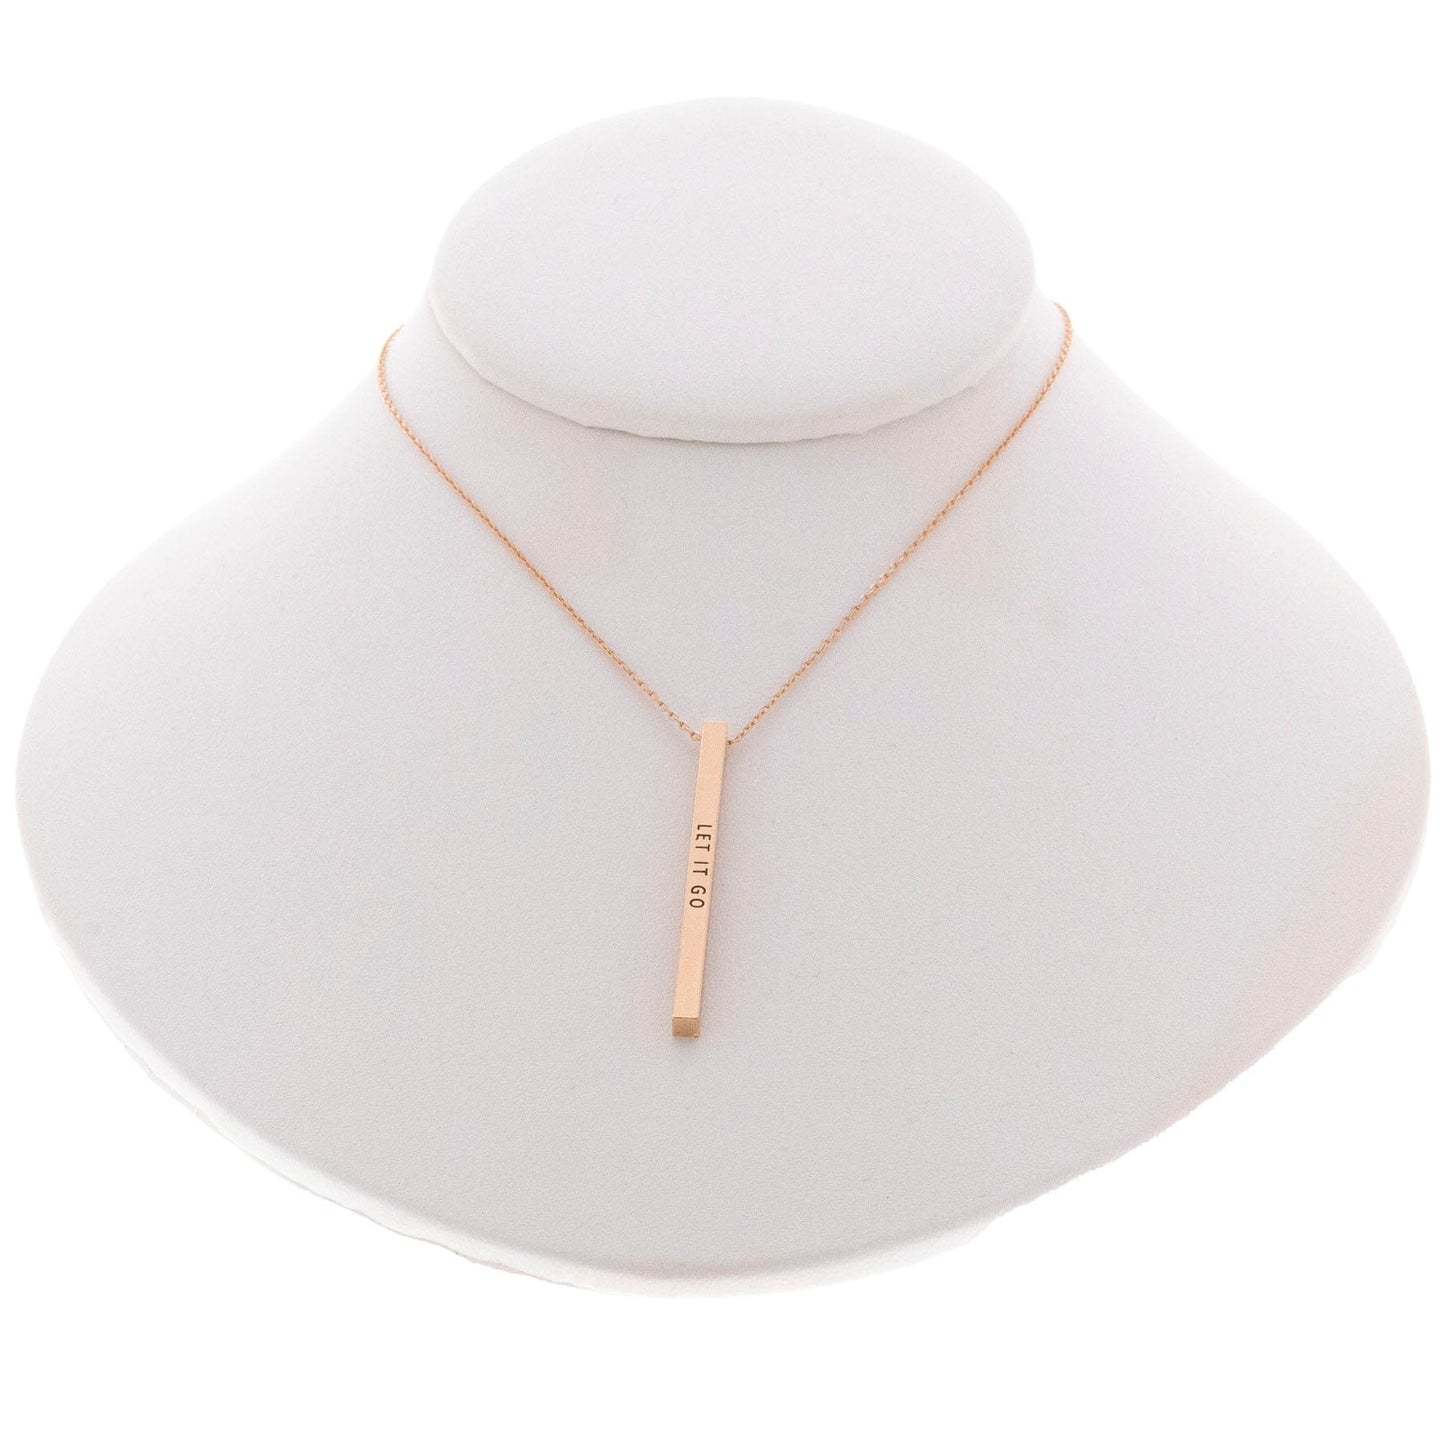 "Let It Go" Bar Necklace By Recovery Matters Rose Gold